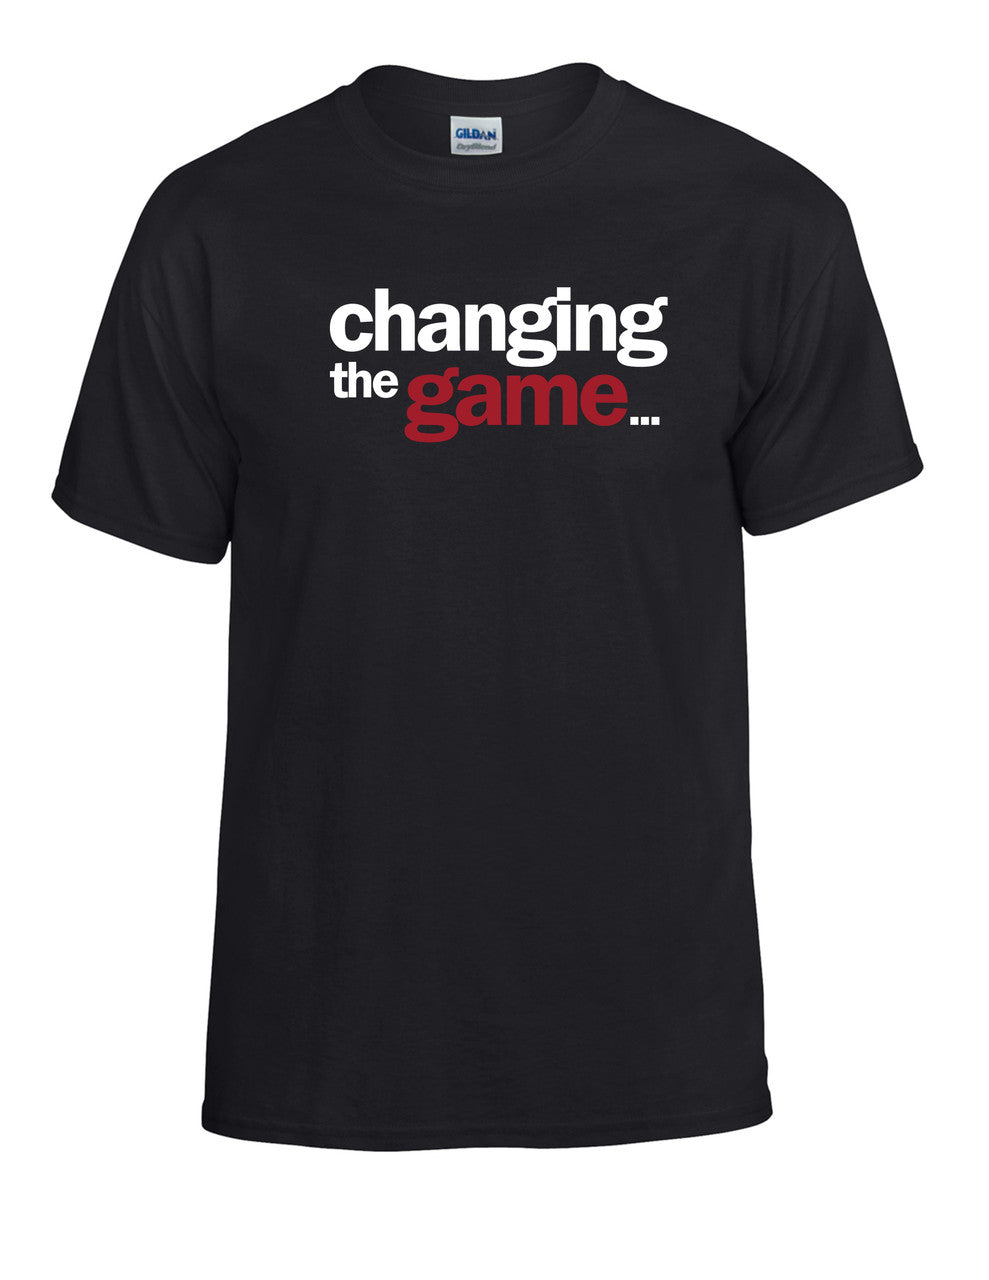 Changing The Game t-shirts - FREE SHIPPING